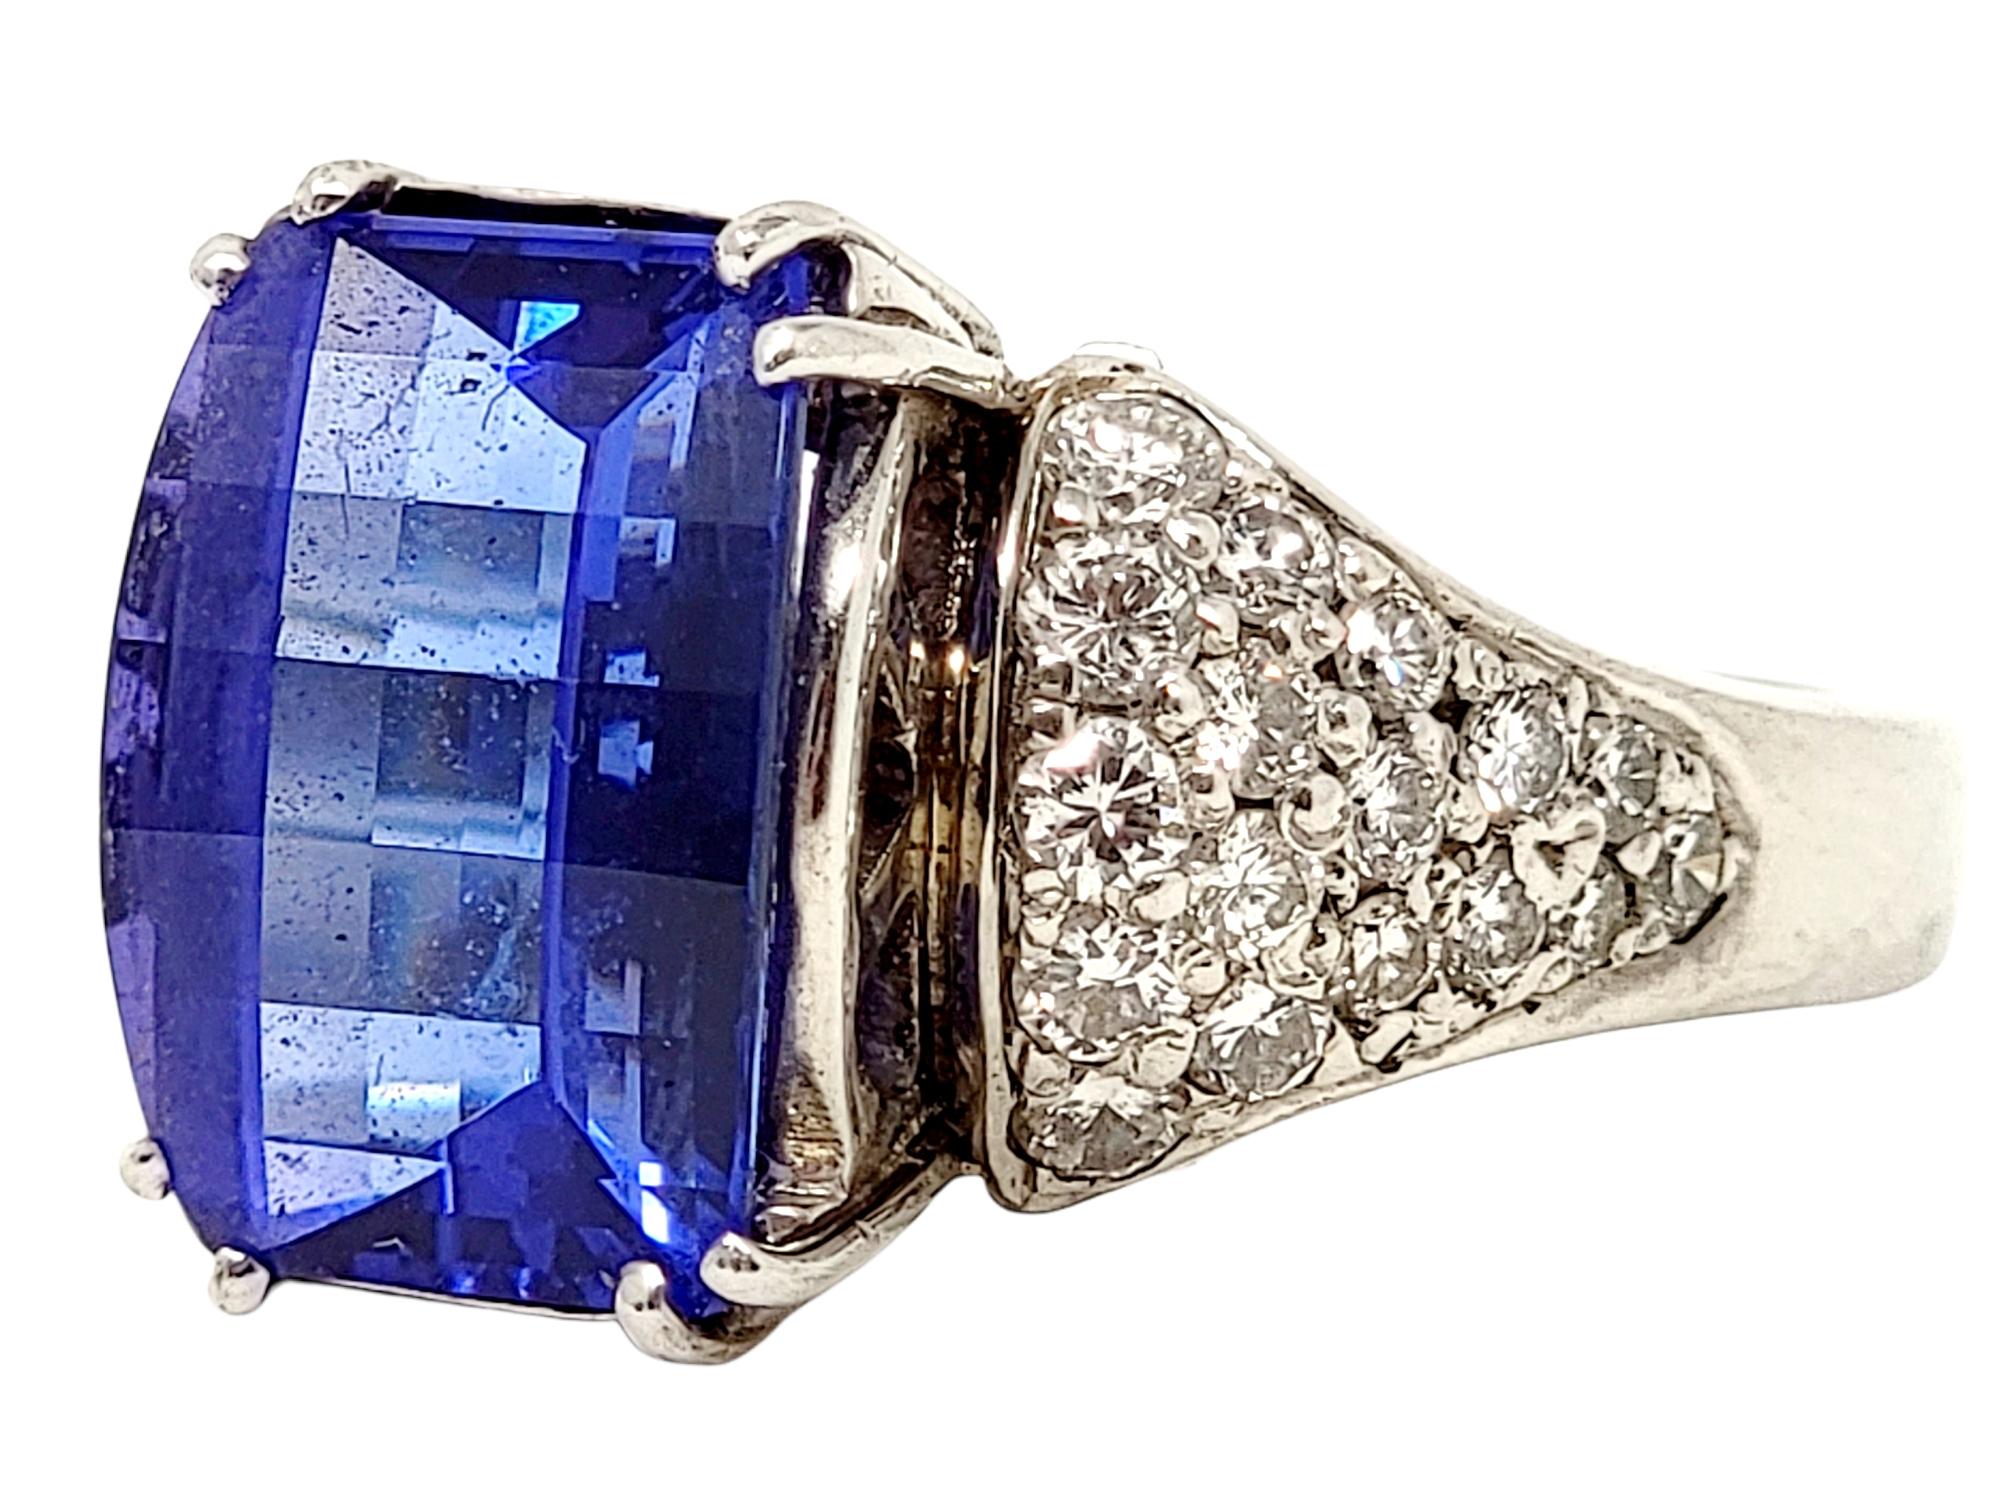 8.70 Carat Total Rectangular Step Cut Tanzanite and Pave Diamond Platinum Ring In Fair Condition For Sale In Scottsdale, AZ